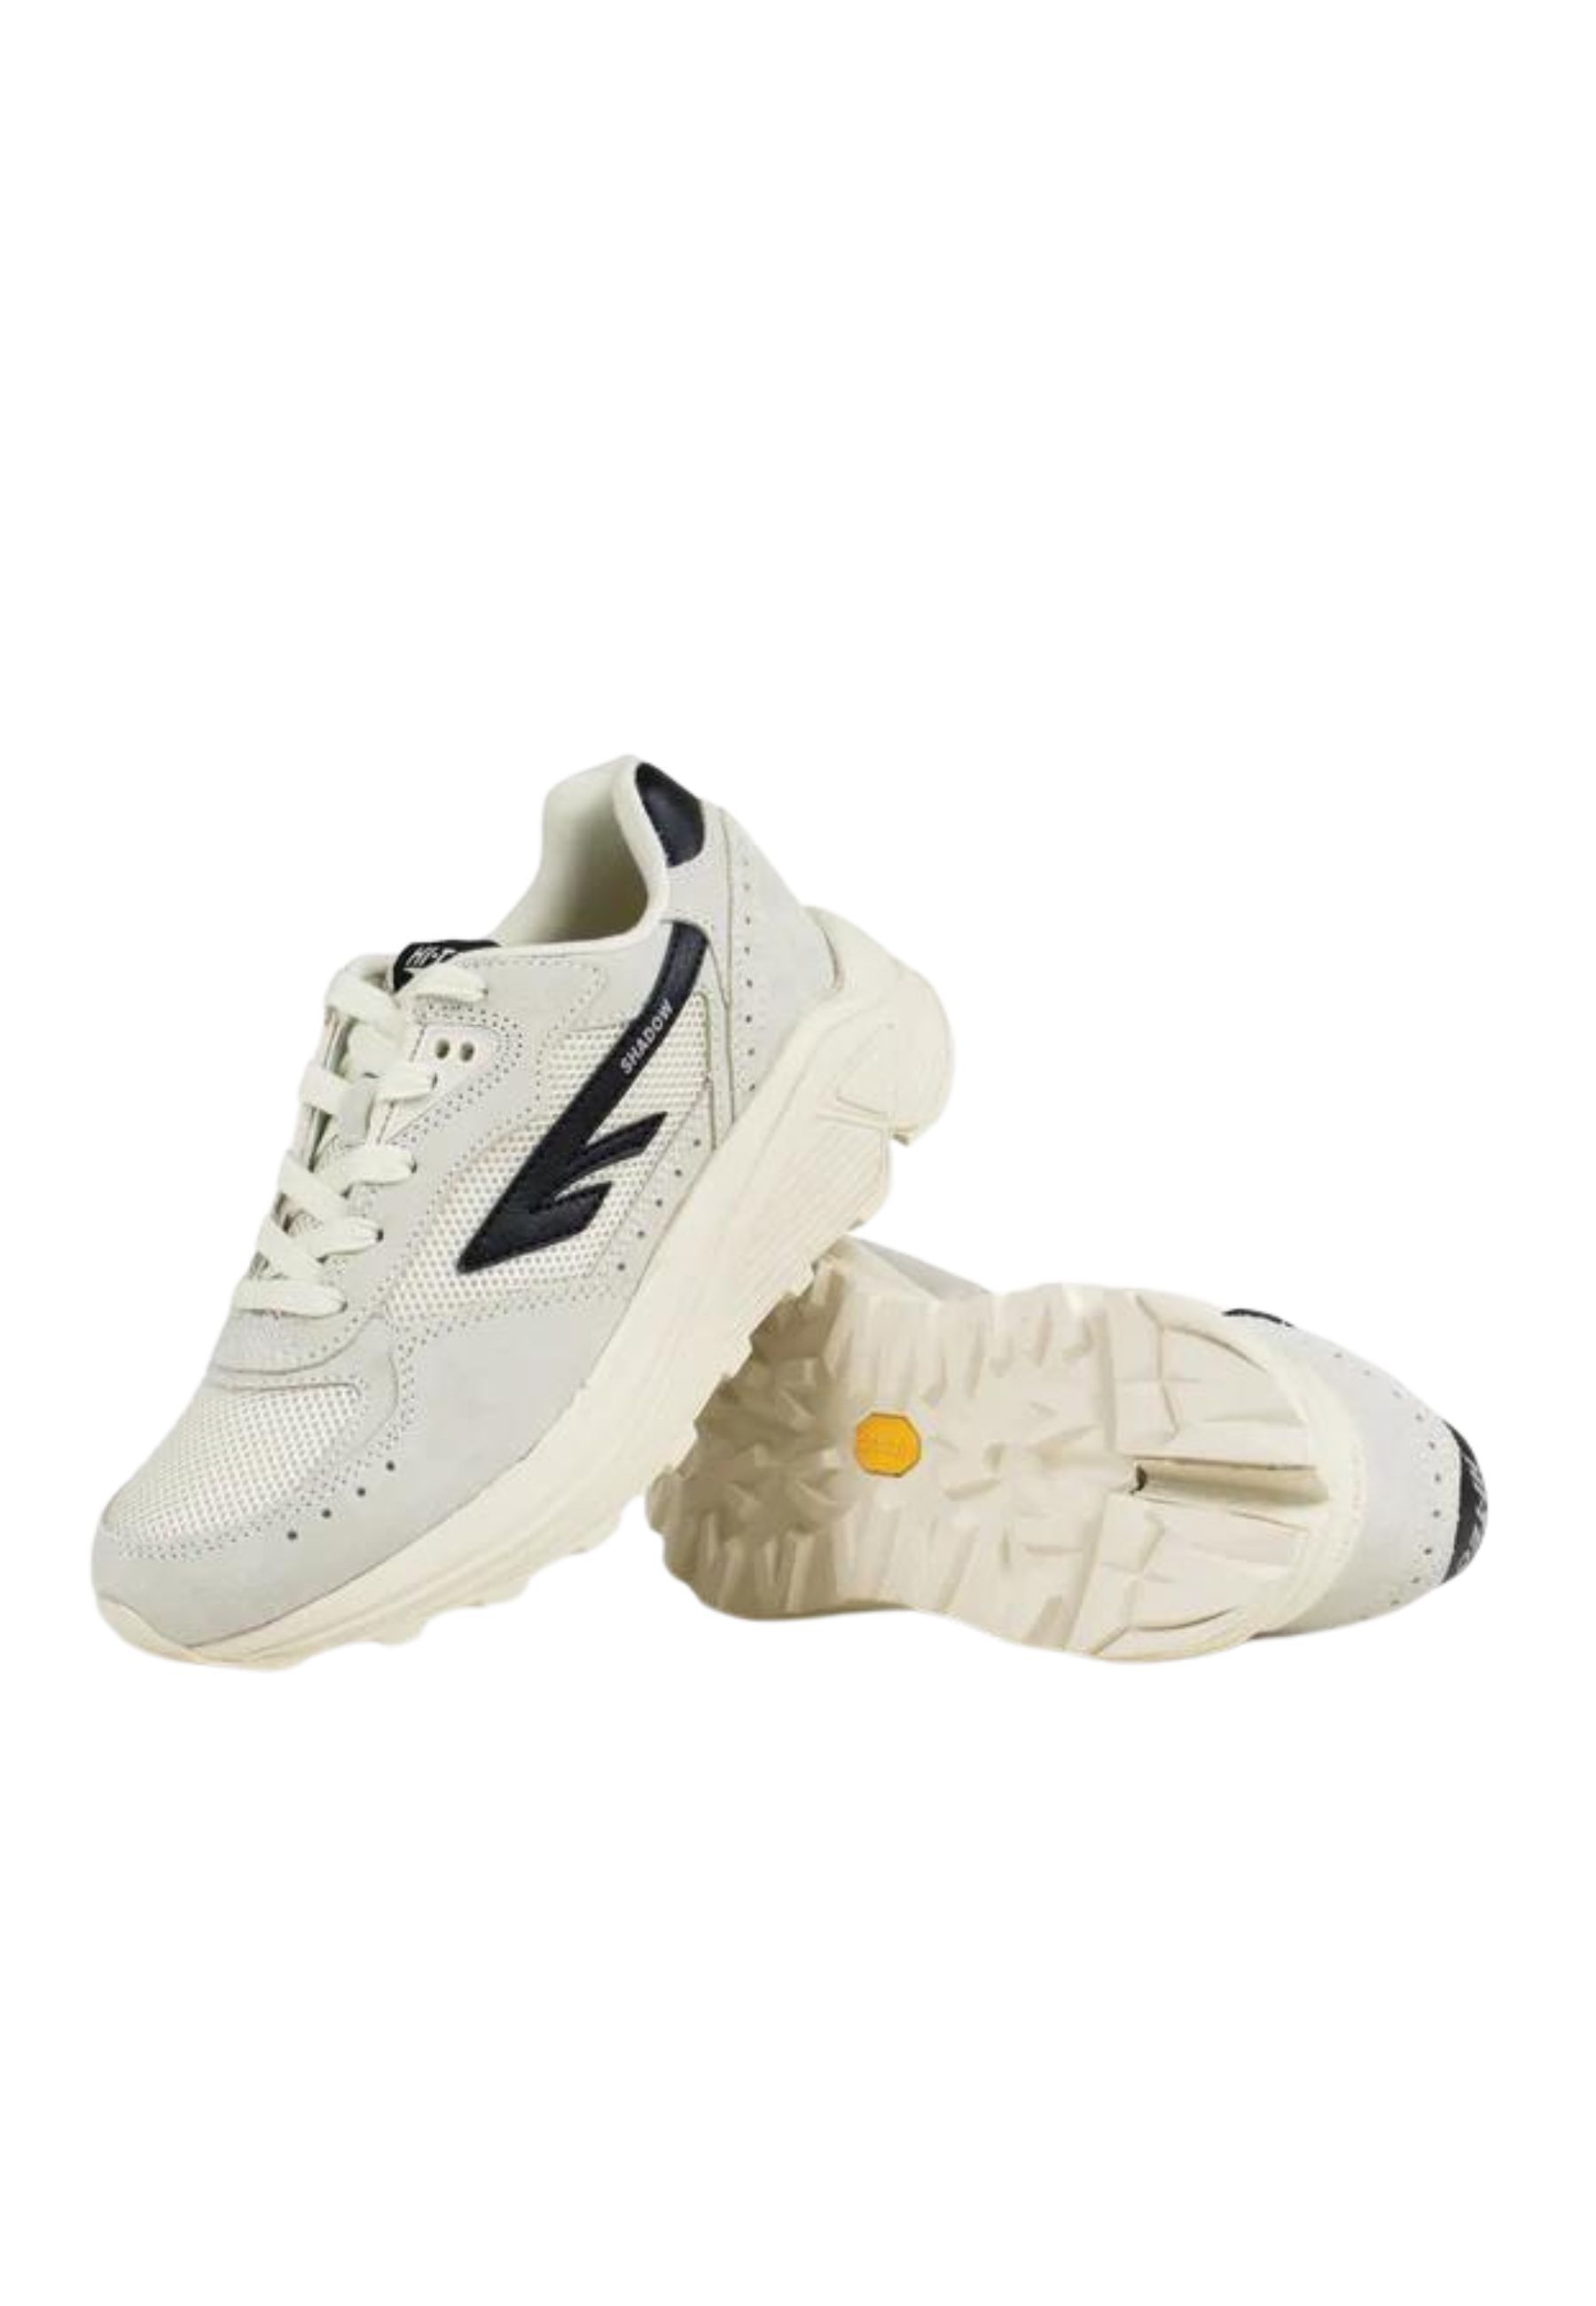 Hts Shadow Rgs Sneakers Off White Hts Shadow Rgs